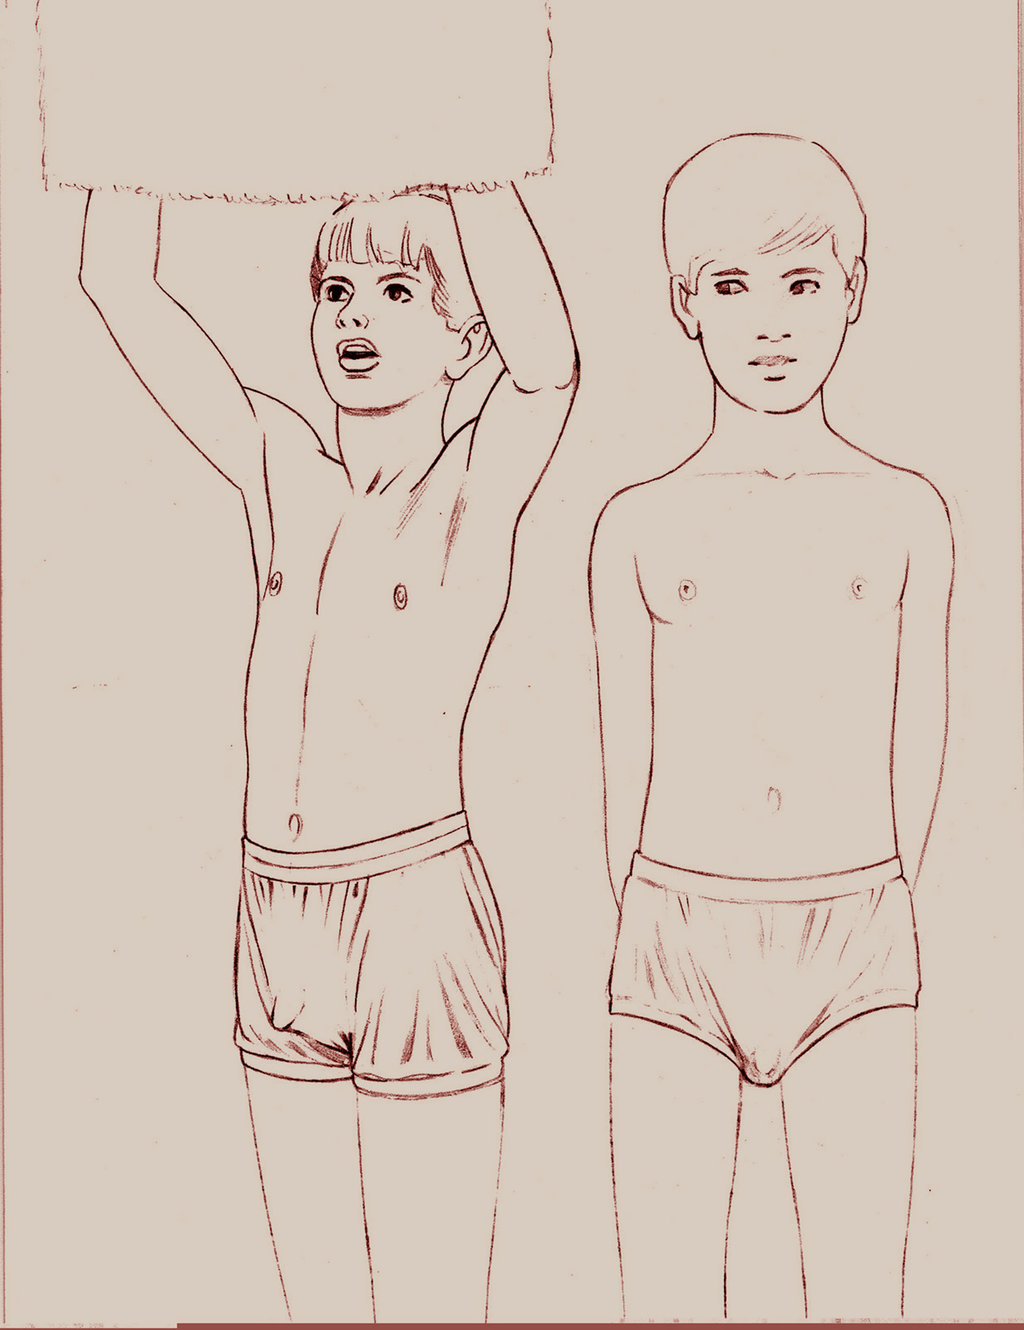 !boys_changing_for_pe_by_artboy6